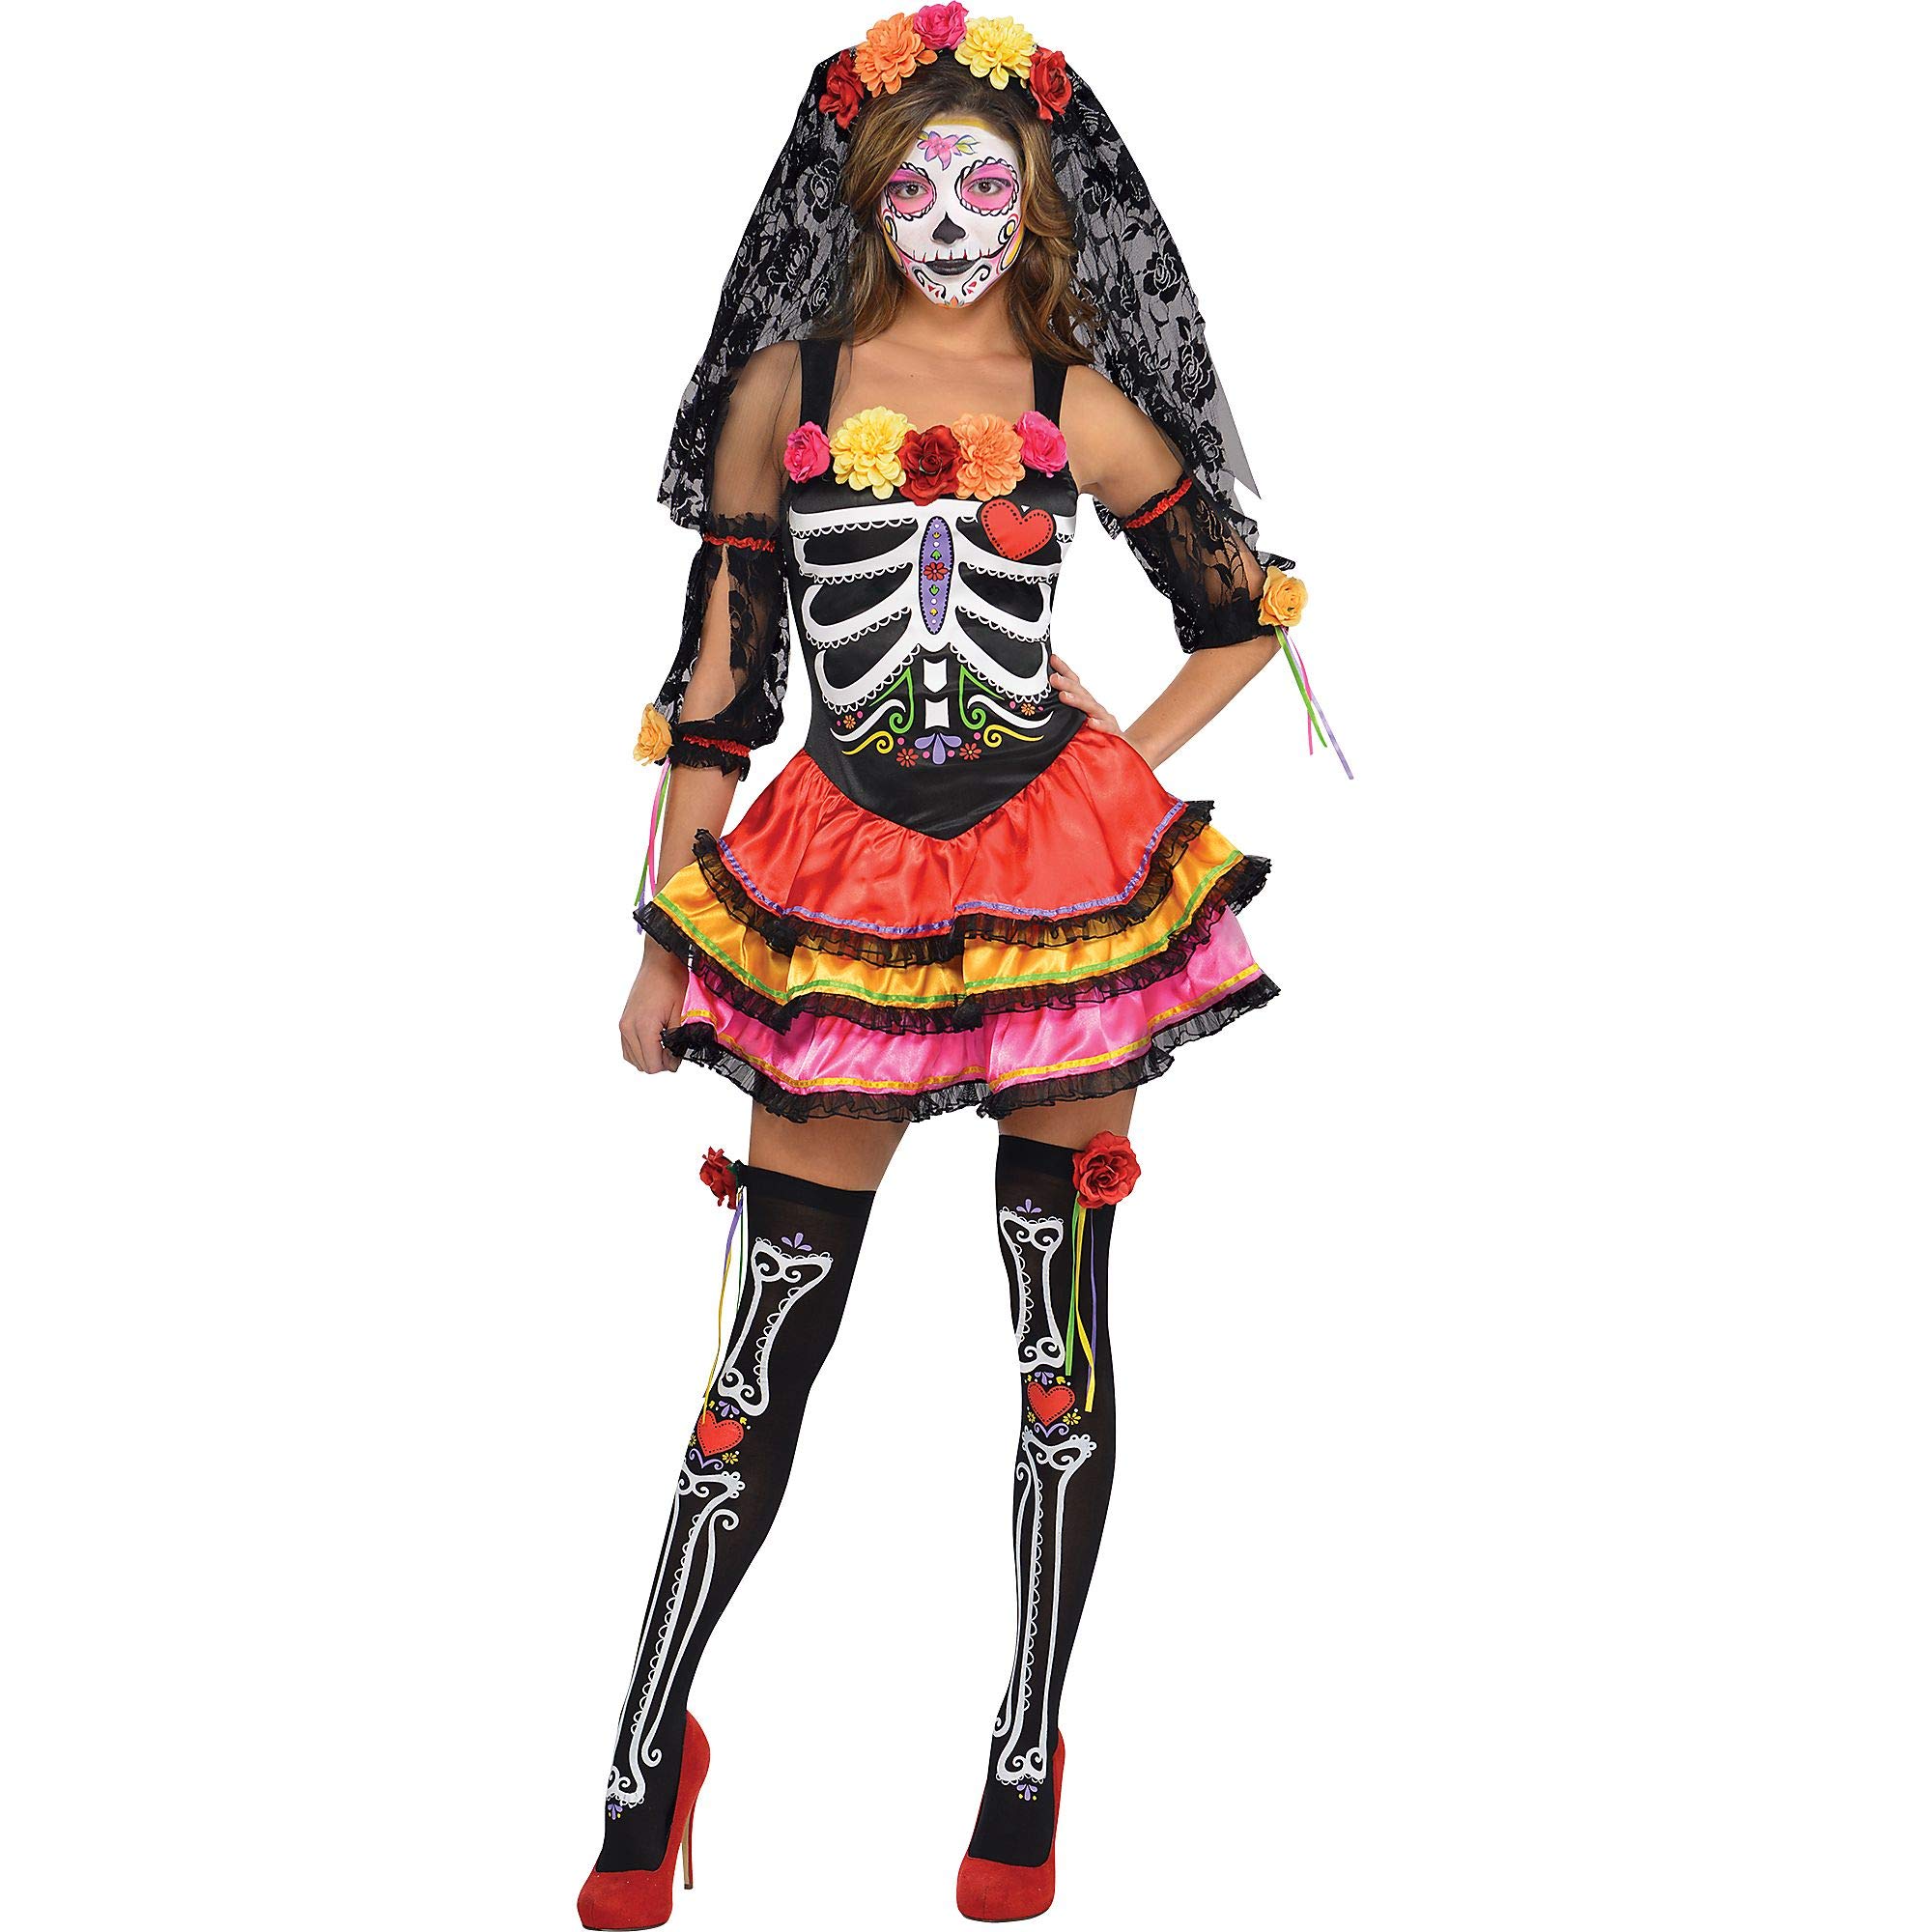 (PKT) (844569-55) Adult Ladies Day Of The Dead Señorita Costume (Large)